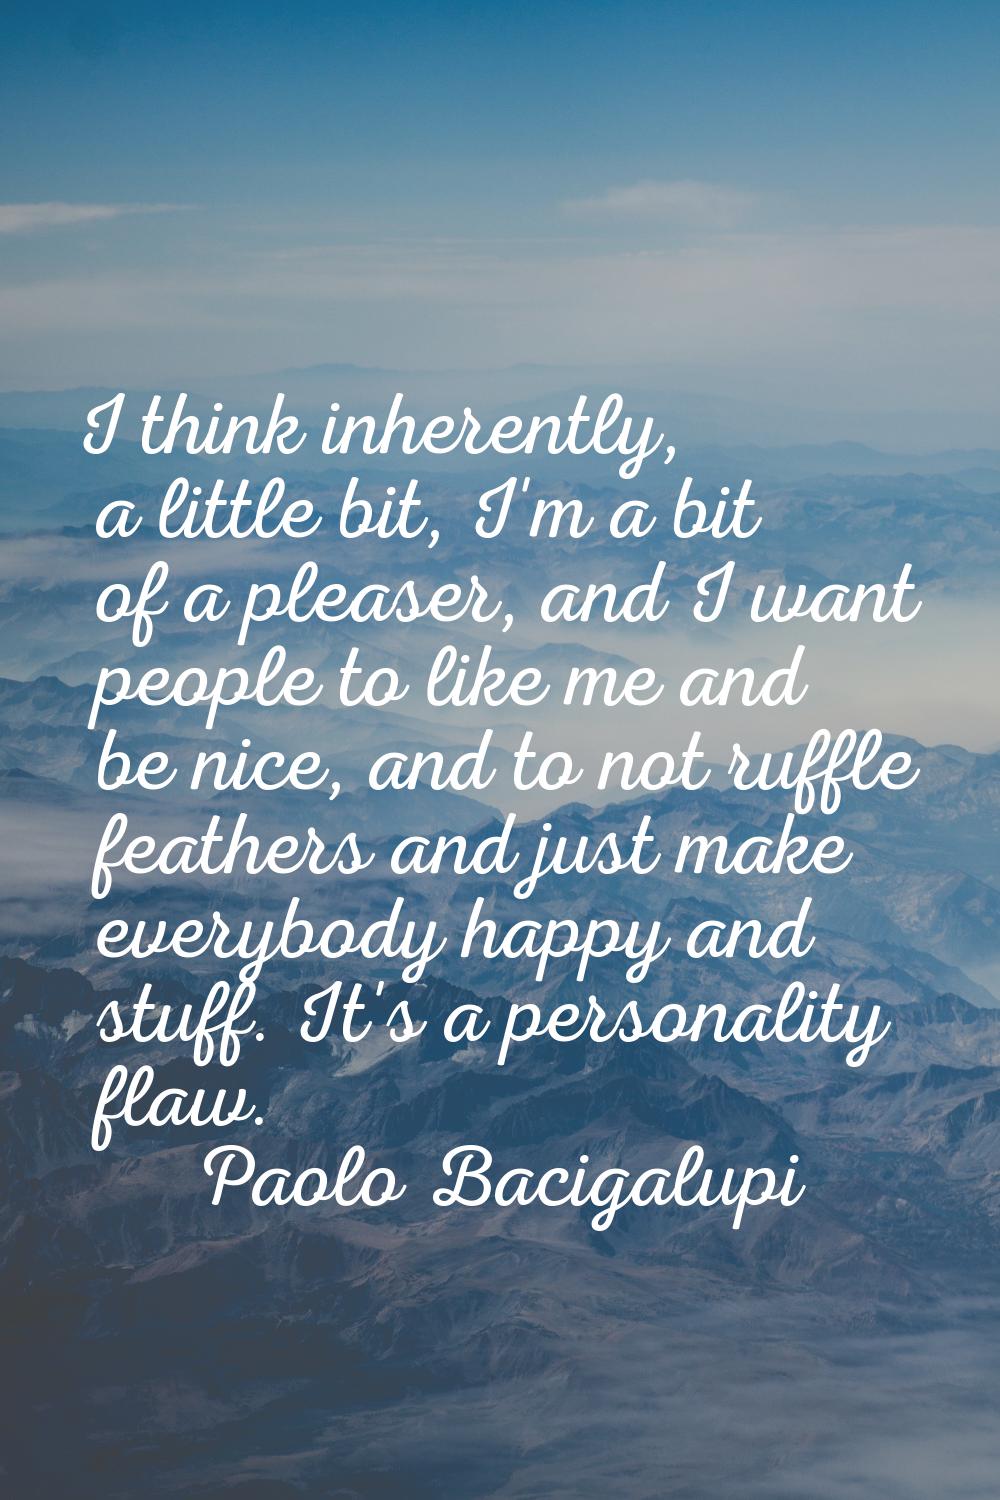 I think inherently, a little bit, I'm a bit of a pleaser, and I want people to like me and be nice,